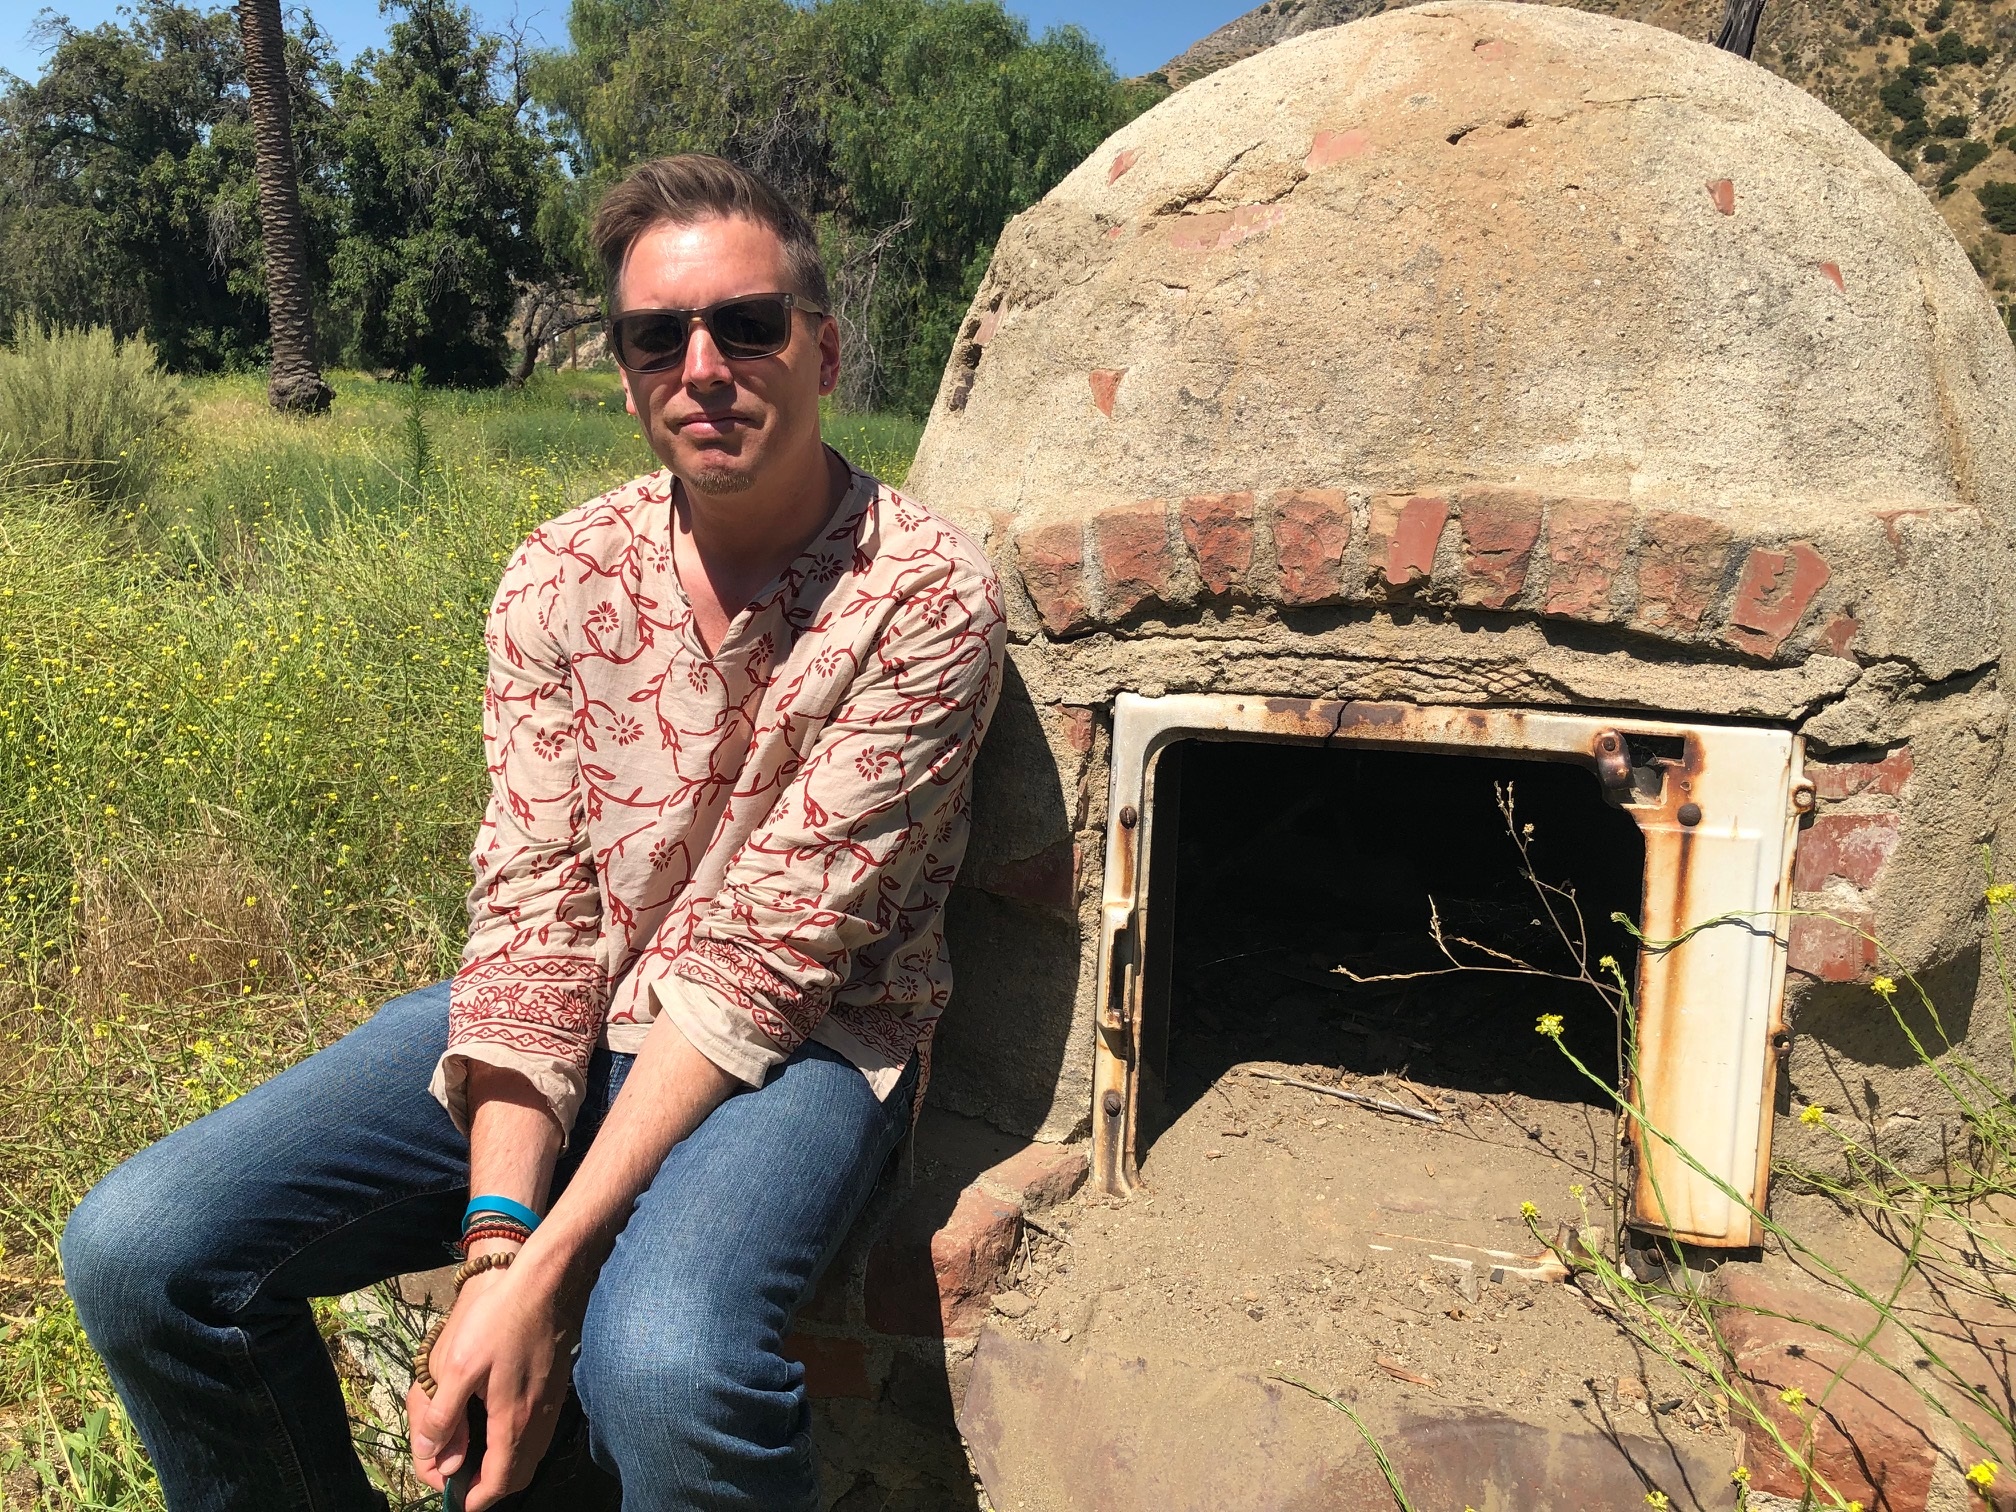 2020 Karmiole Research Fellow Brian Chidester sitting on a hearth outdoors.